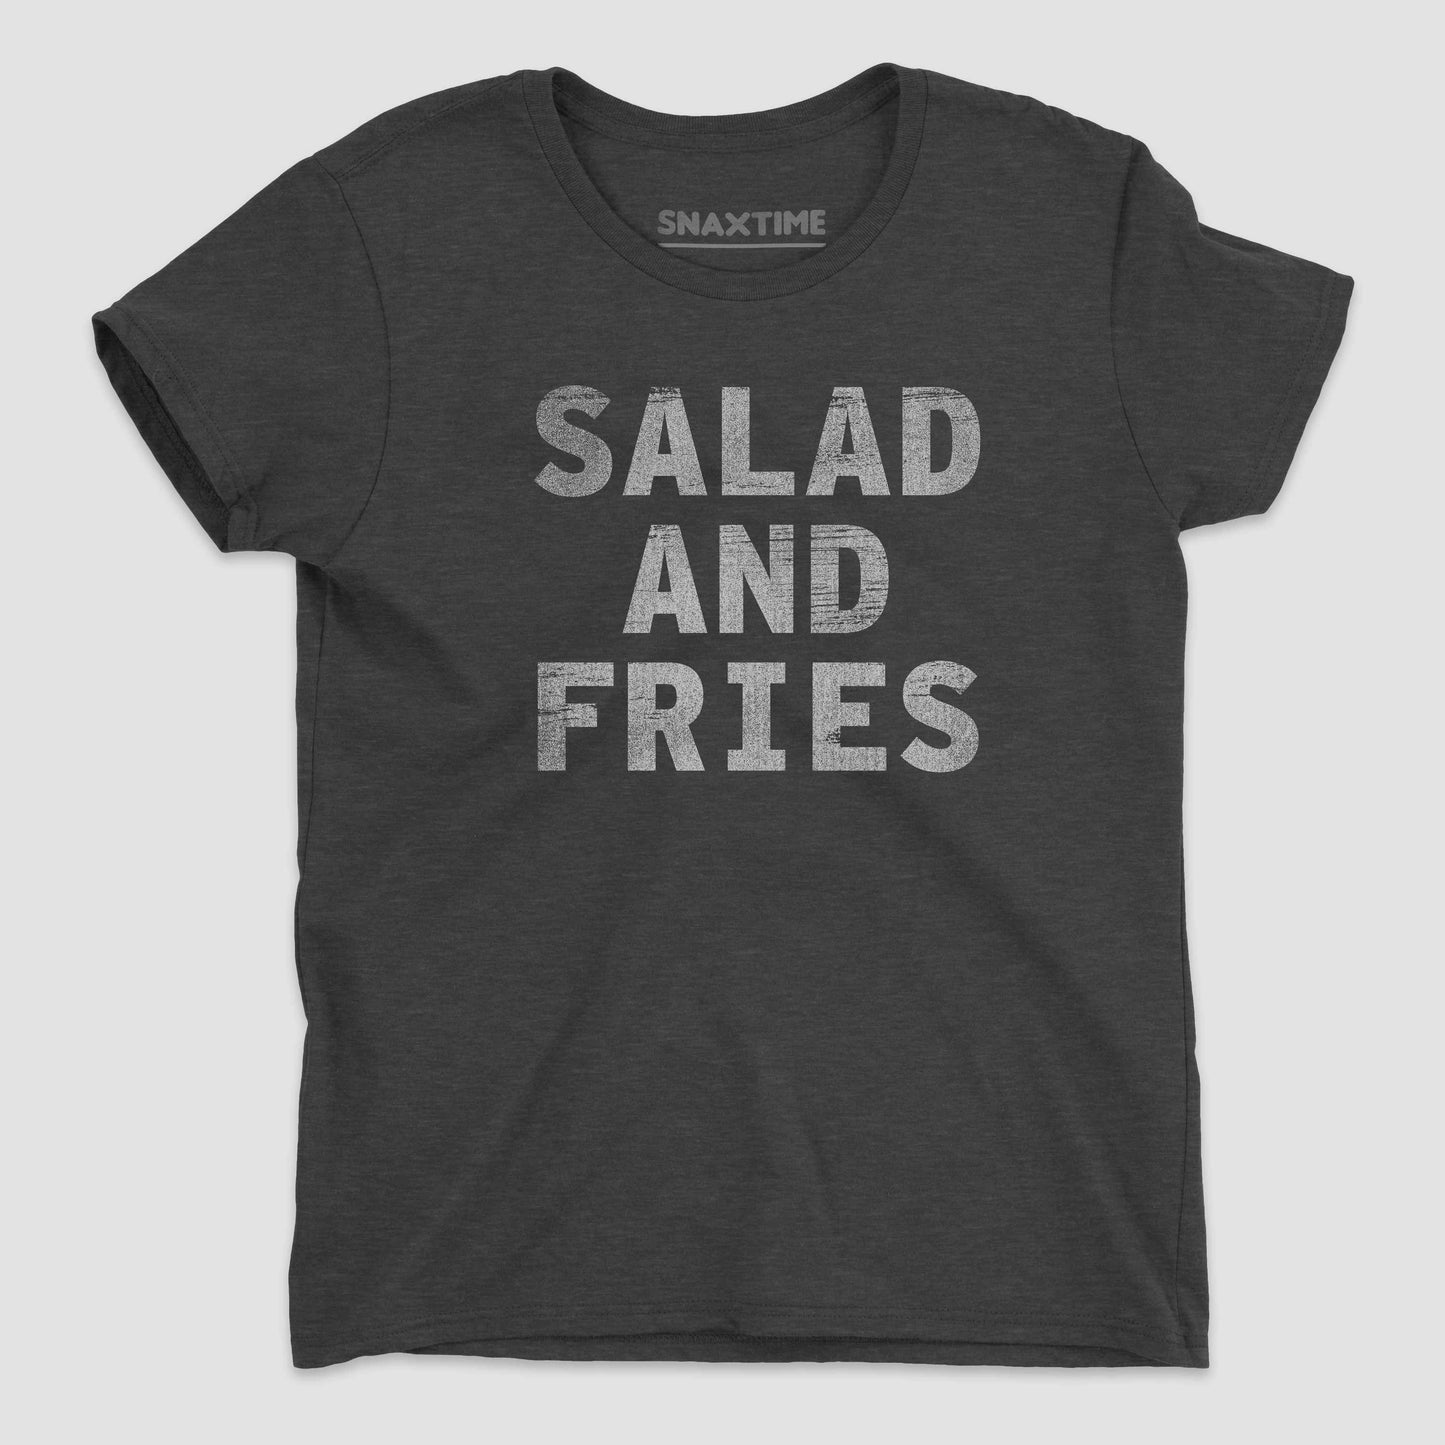 Heather Dark Grey Salad and Fries Women's Graphic T-Shirt by Snaxtime